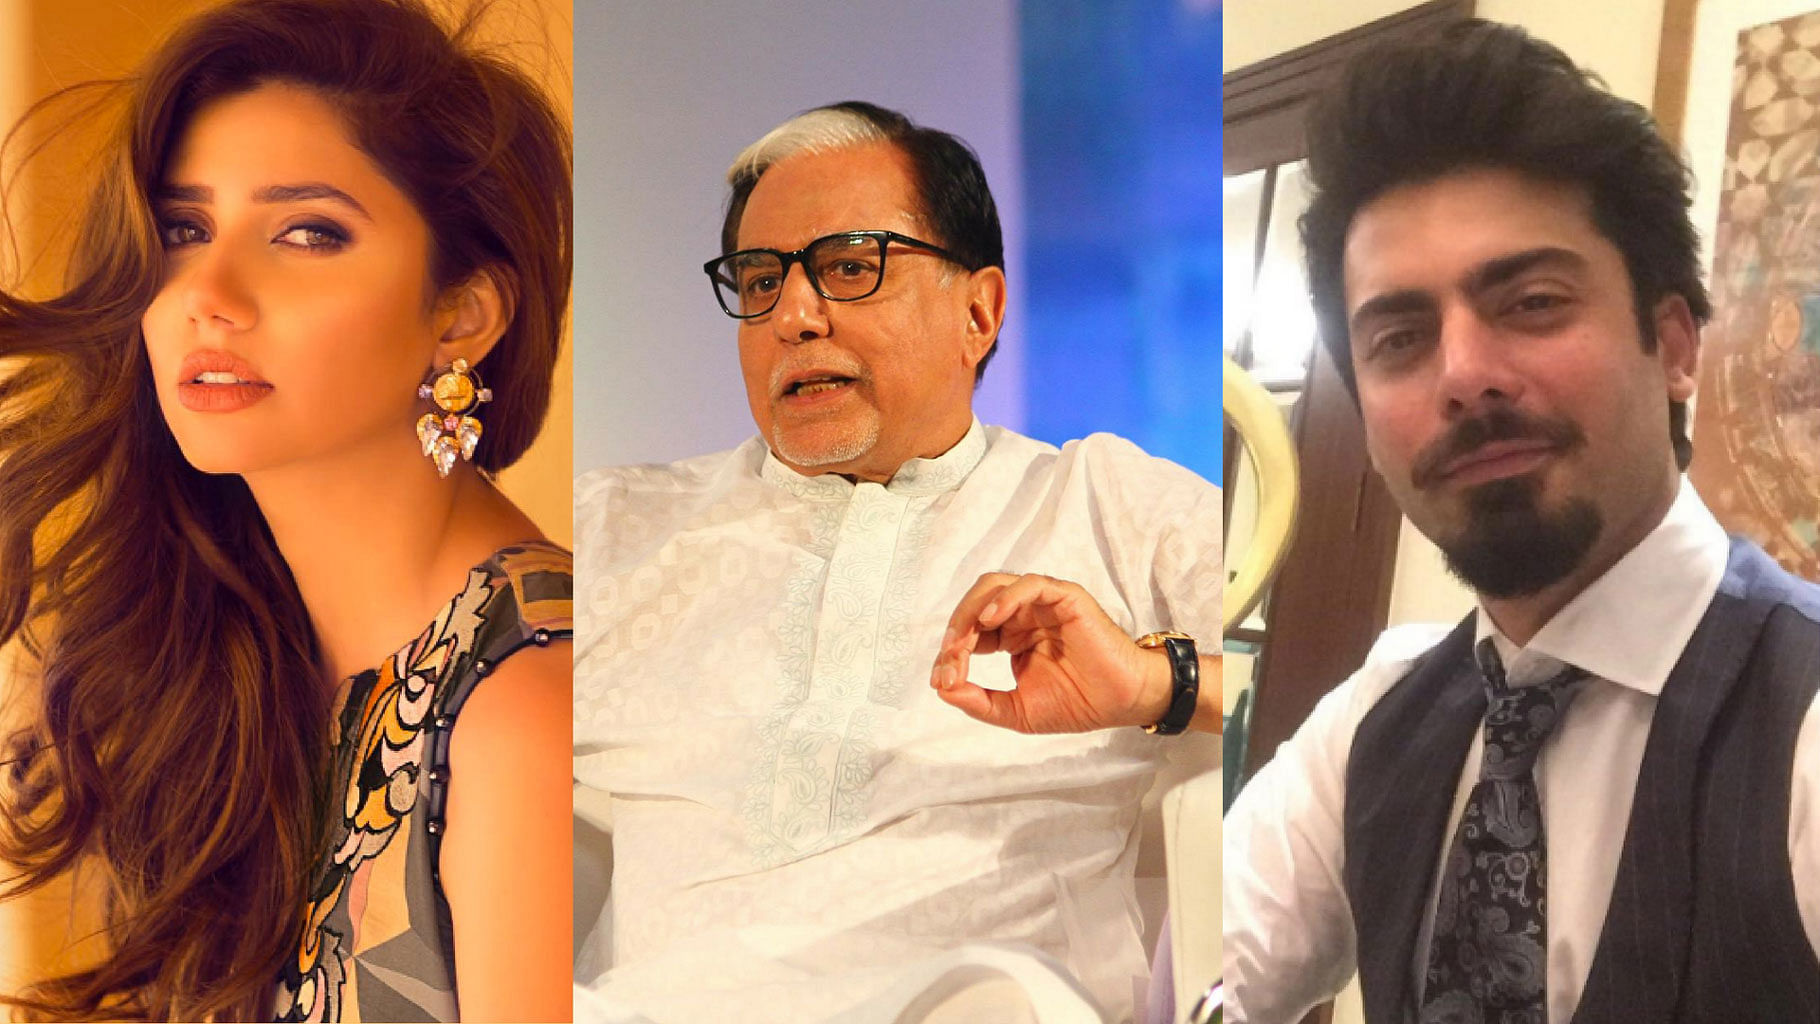 Subhash Chandra says he requested Pakistani artistes to condemn the Uri attack. (Photo courtesy: Twitter)